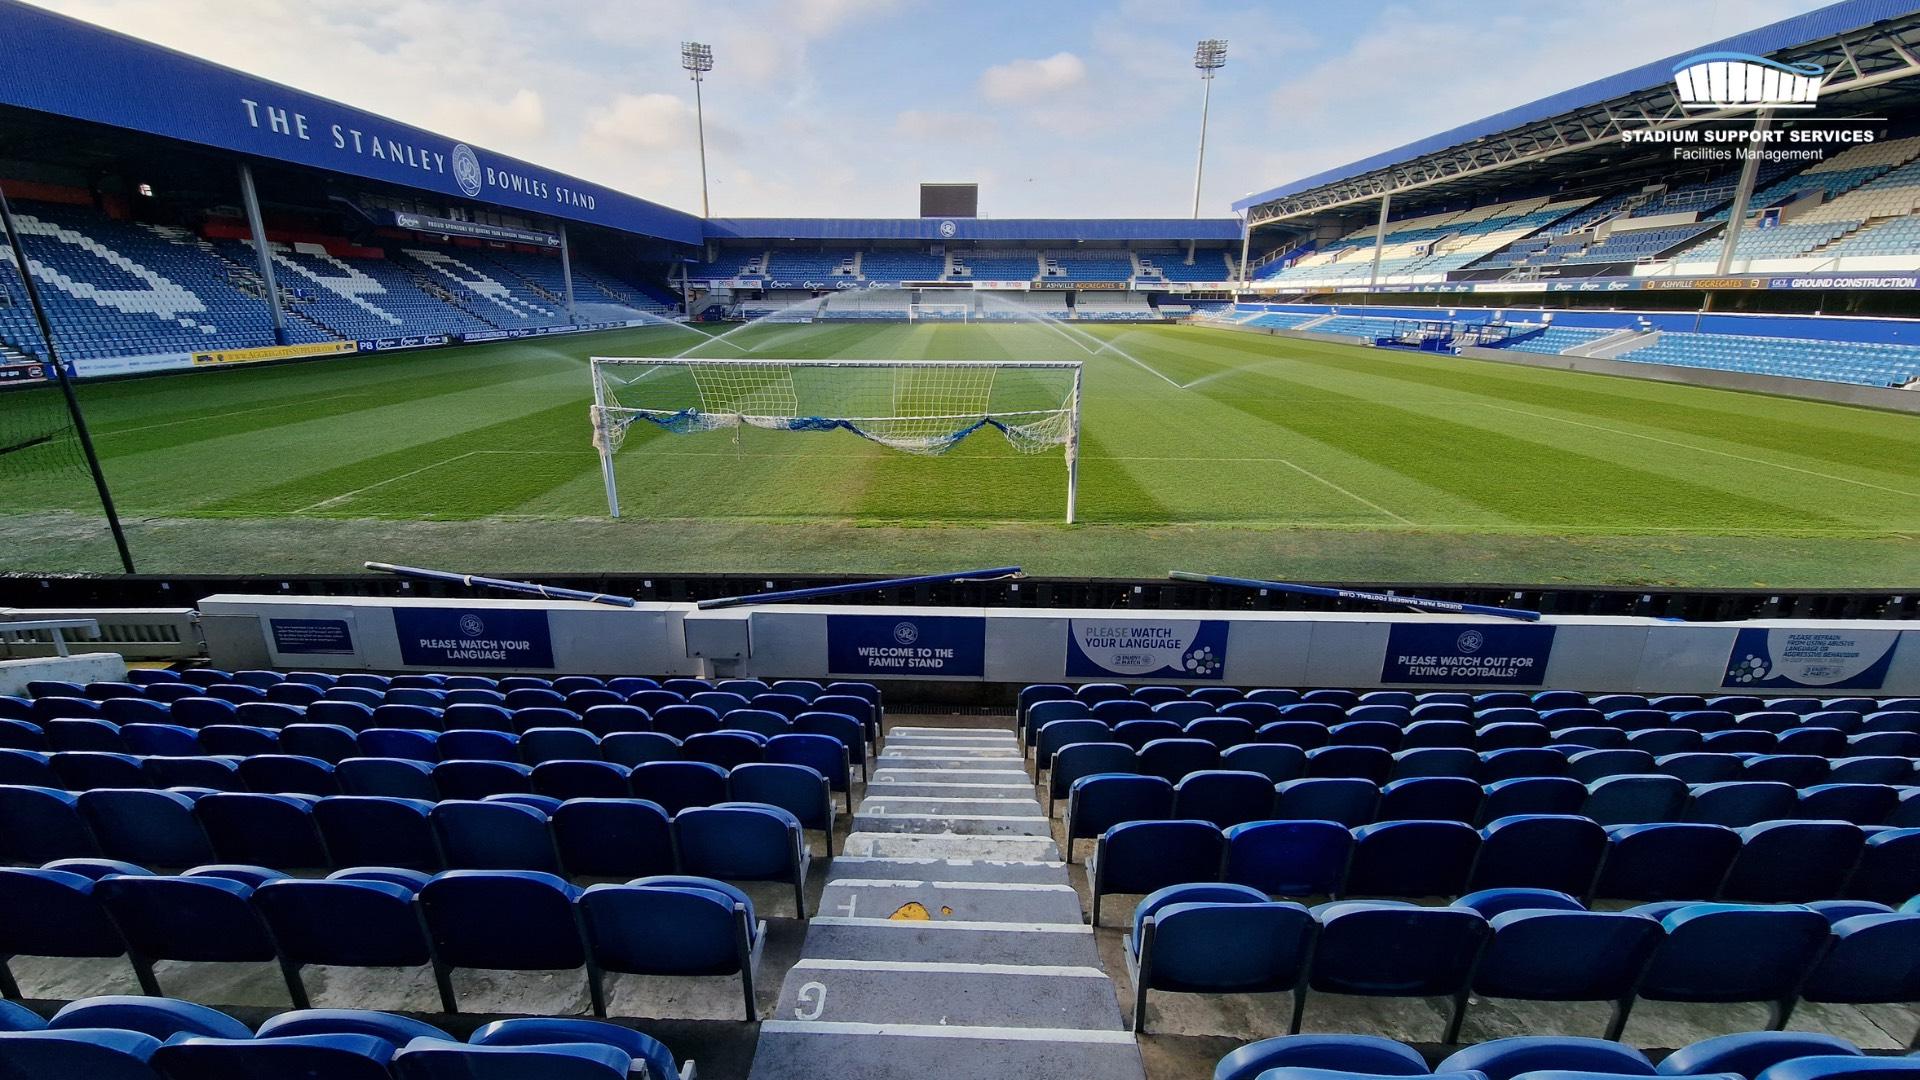 Stadium Support Services Appointed for QPR Facilities Management Contract